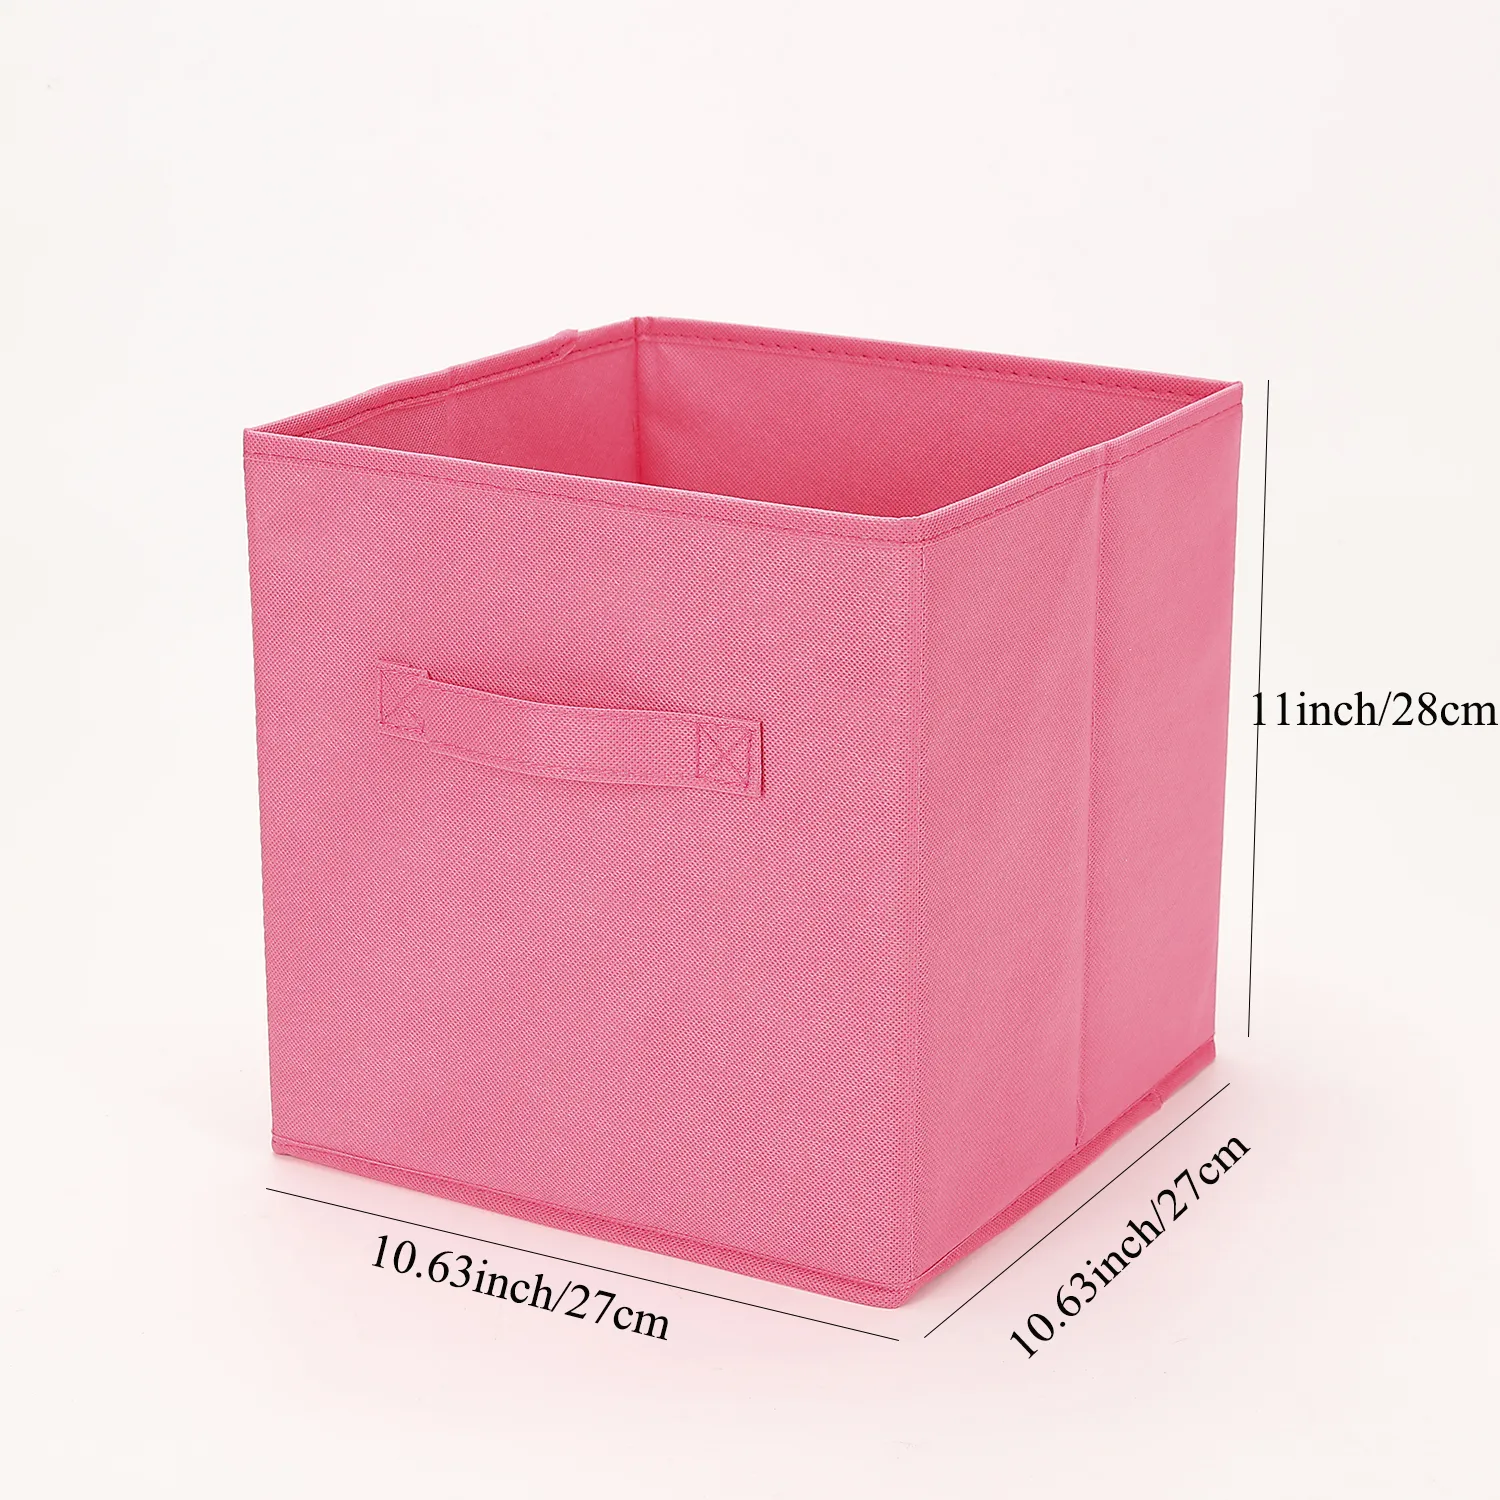 Collapsible Storage Bins Foldable Fabric Storage Basket Organizer Boxes Containers Handles For Nursery Toys, Kids Room, Clothes, Towels, Magazine